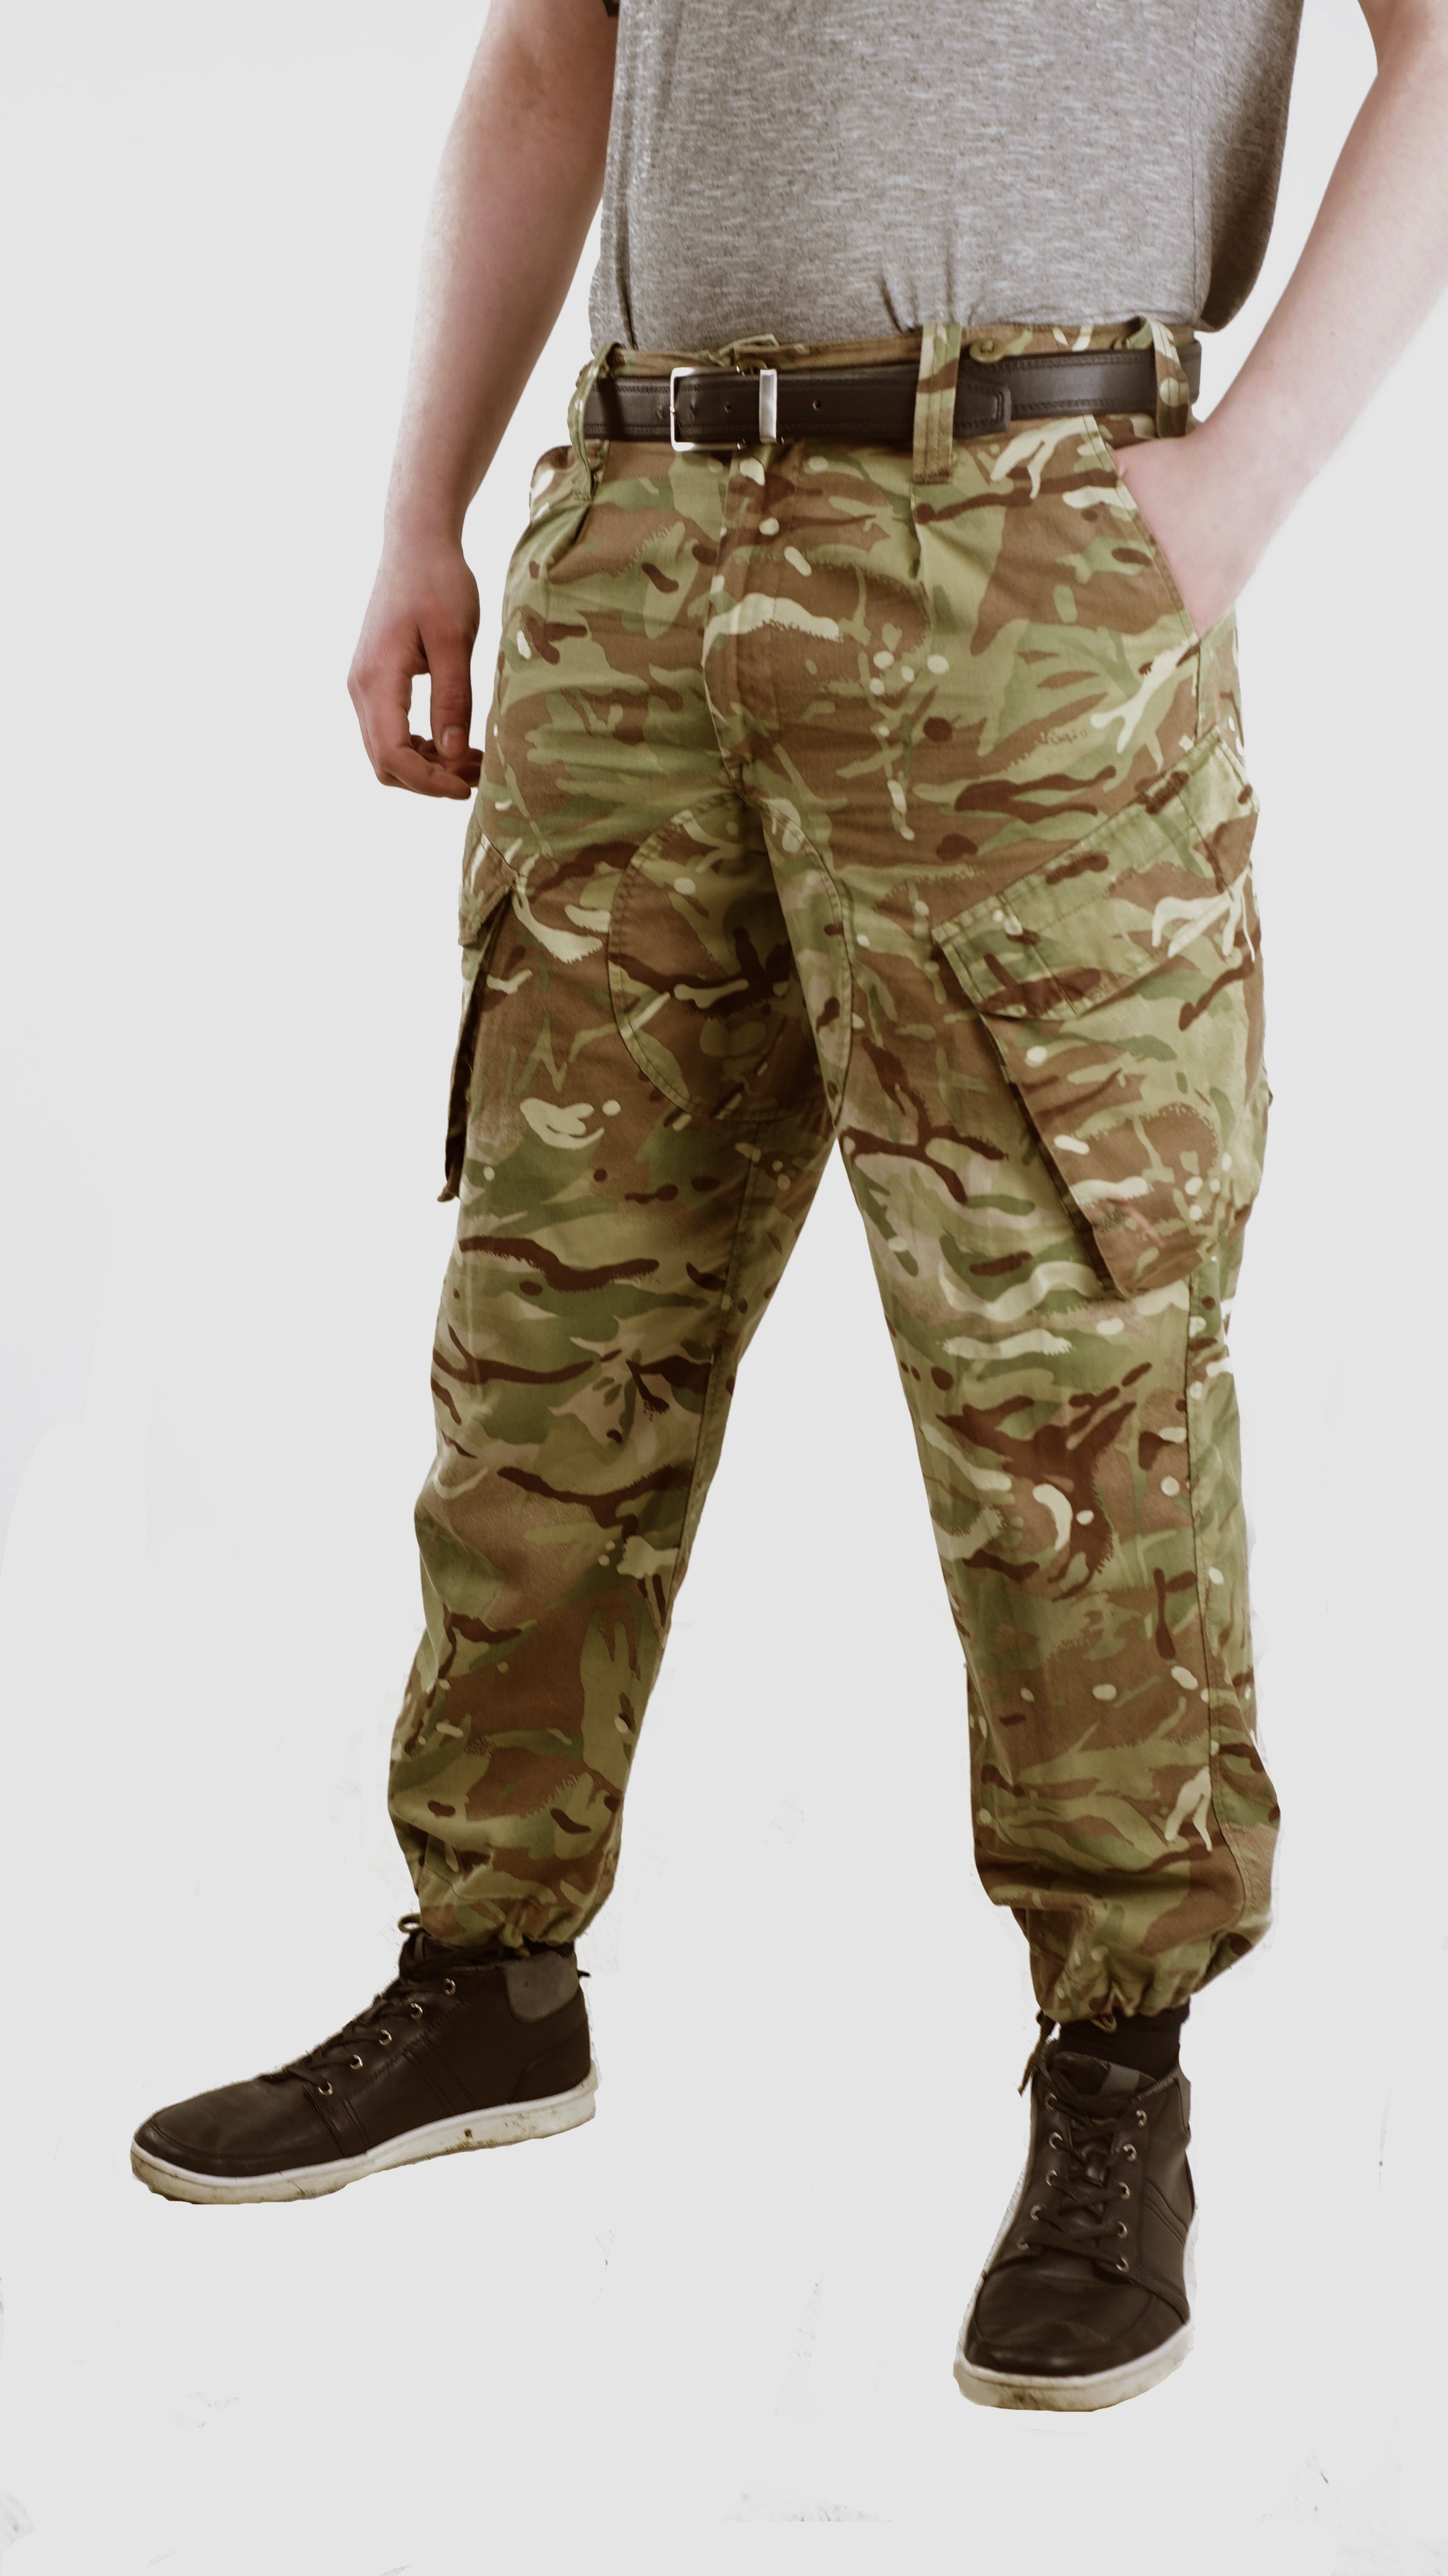 MTP CADET CAMOUFLAGE COMBAT TROUSERS  GRADE 1  VARIOUS SIZES  BRITISH  ARMY 515 rayvectorcom